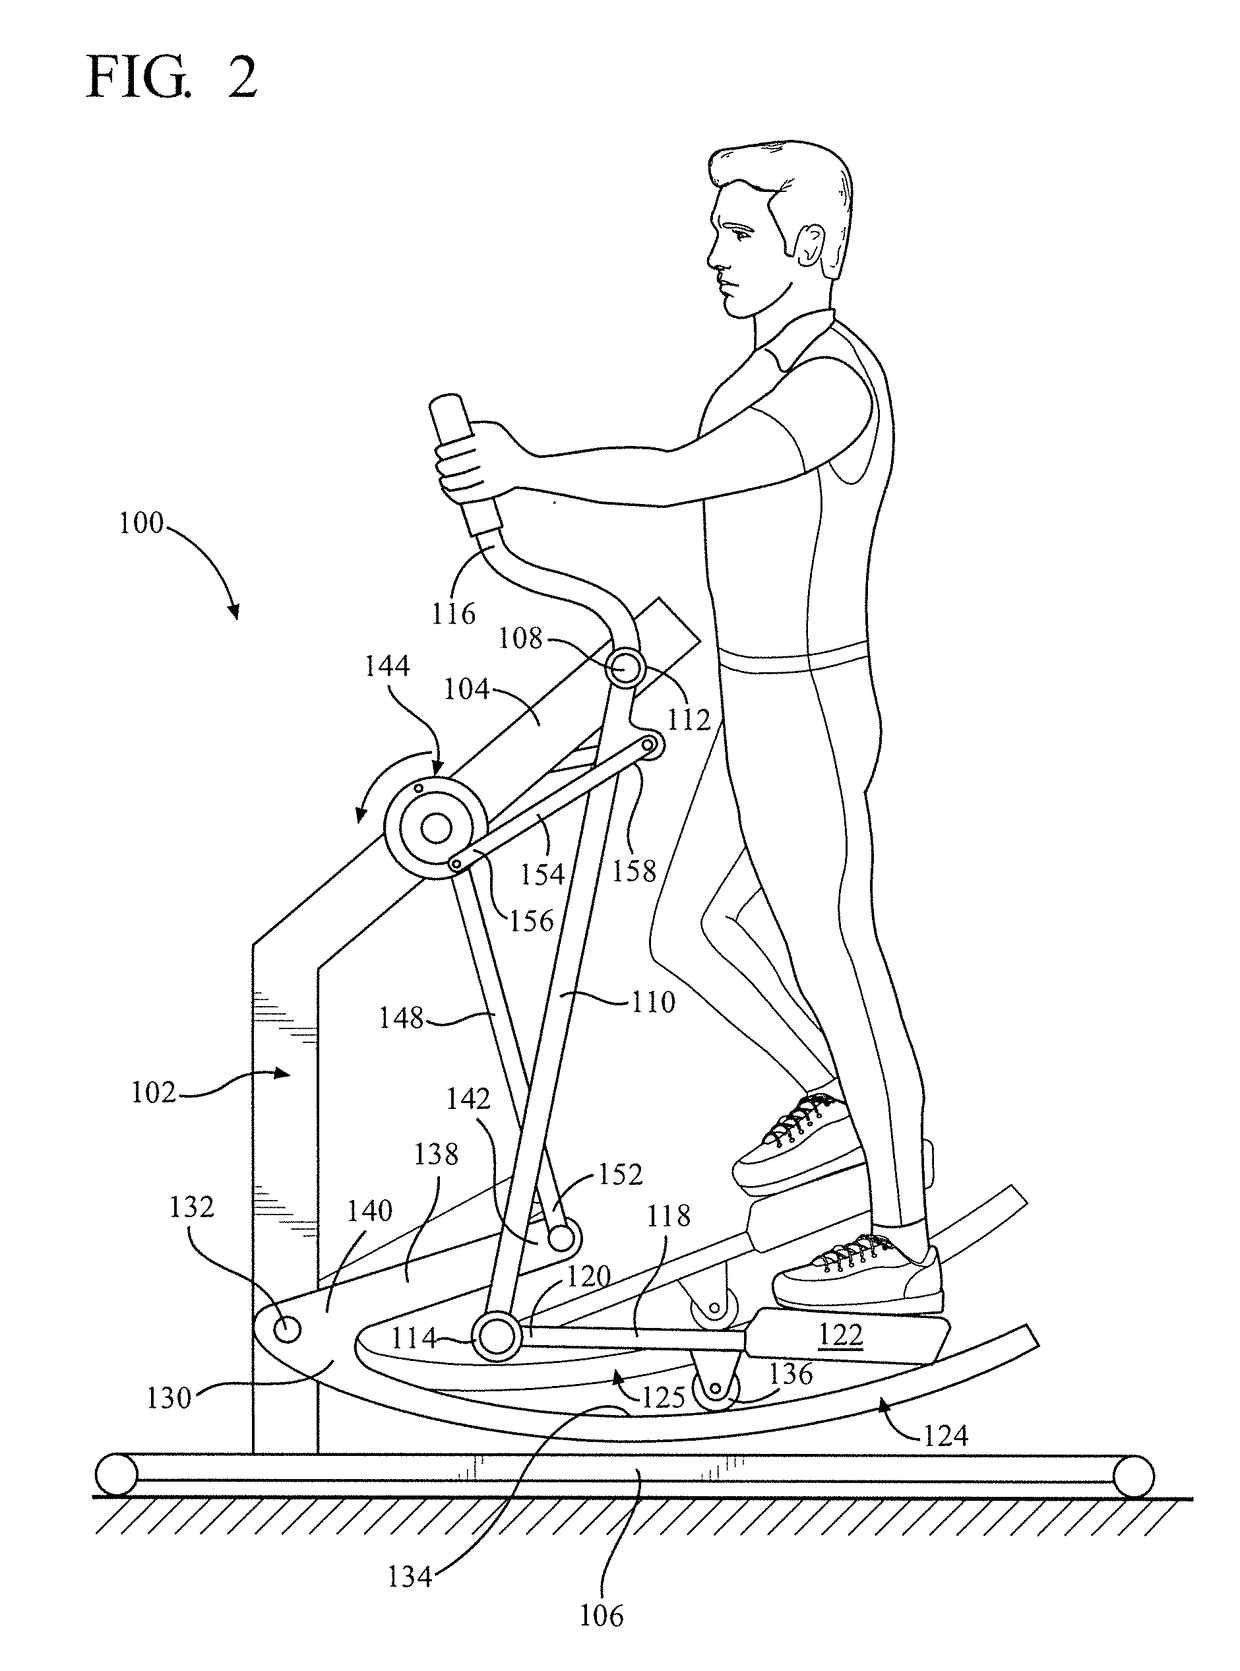 Elliptical exercise device with moving control tracks